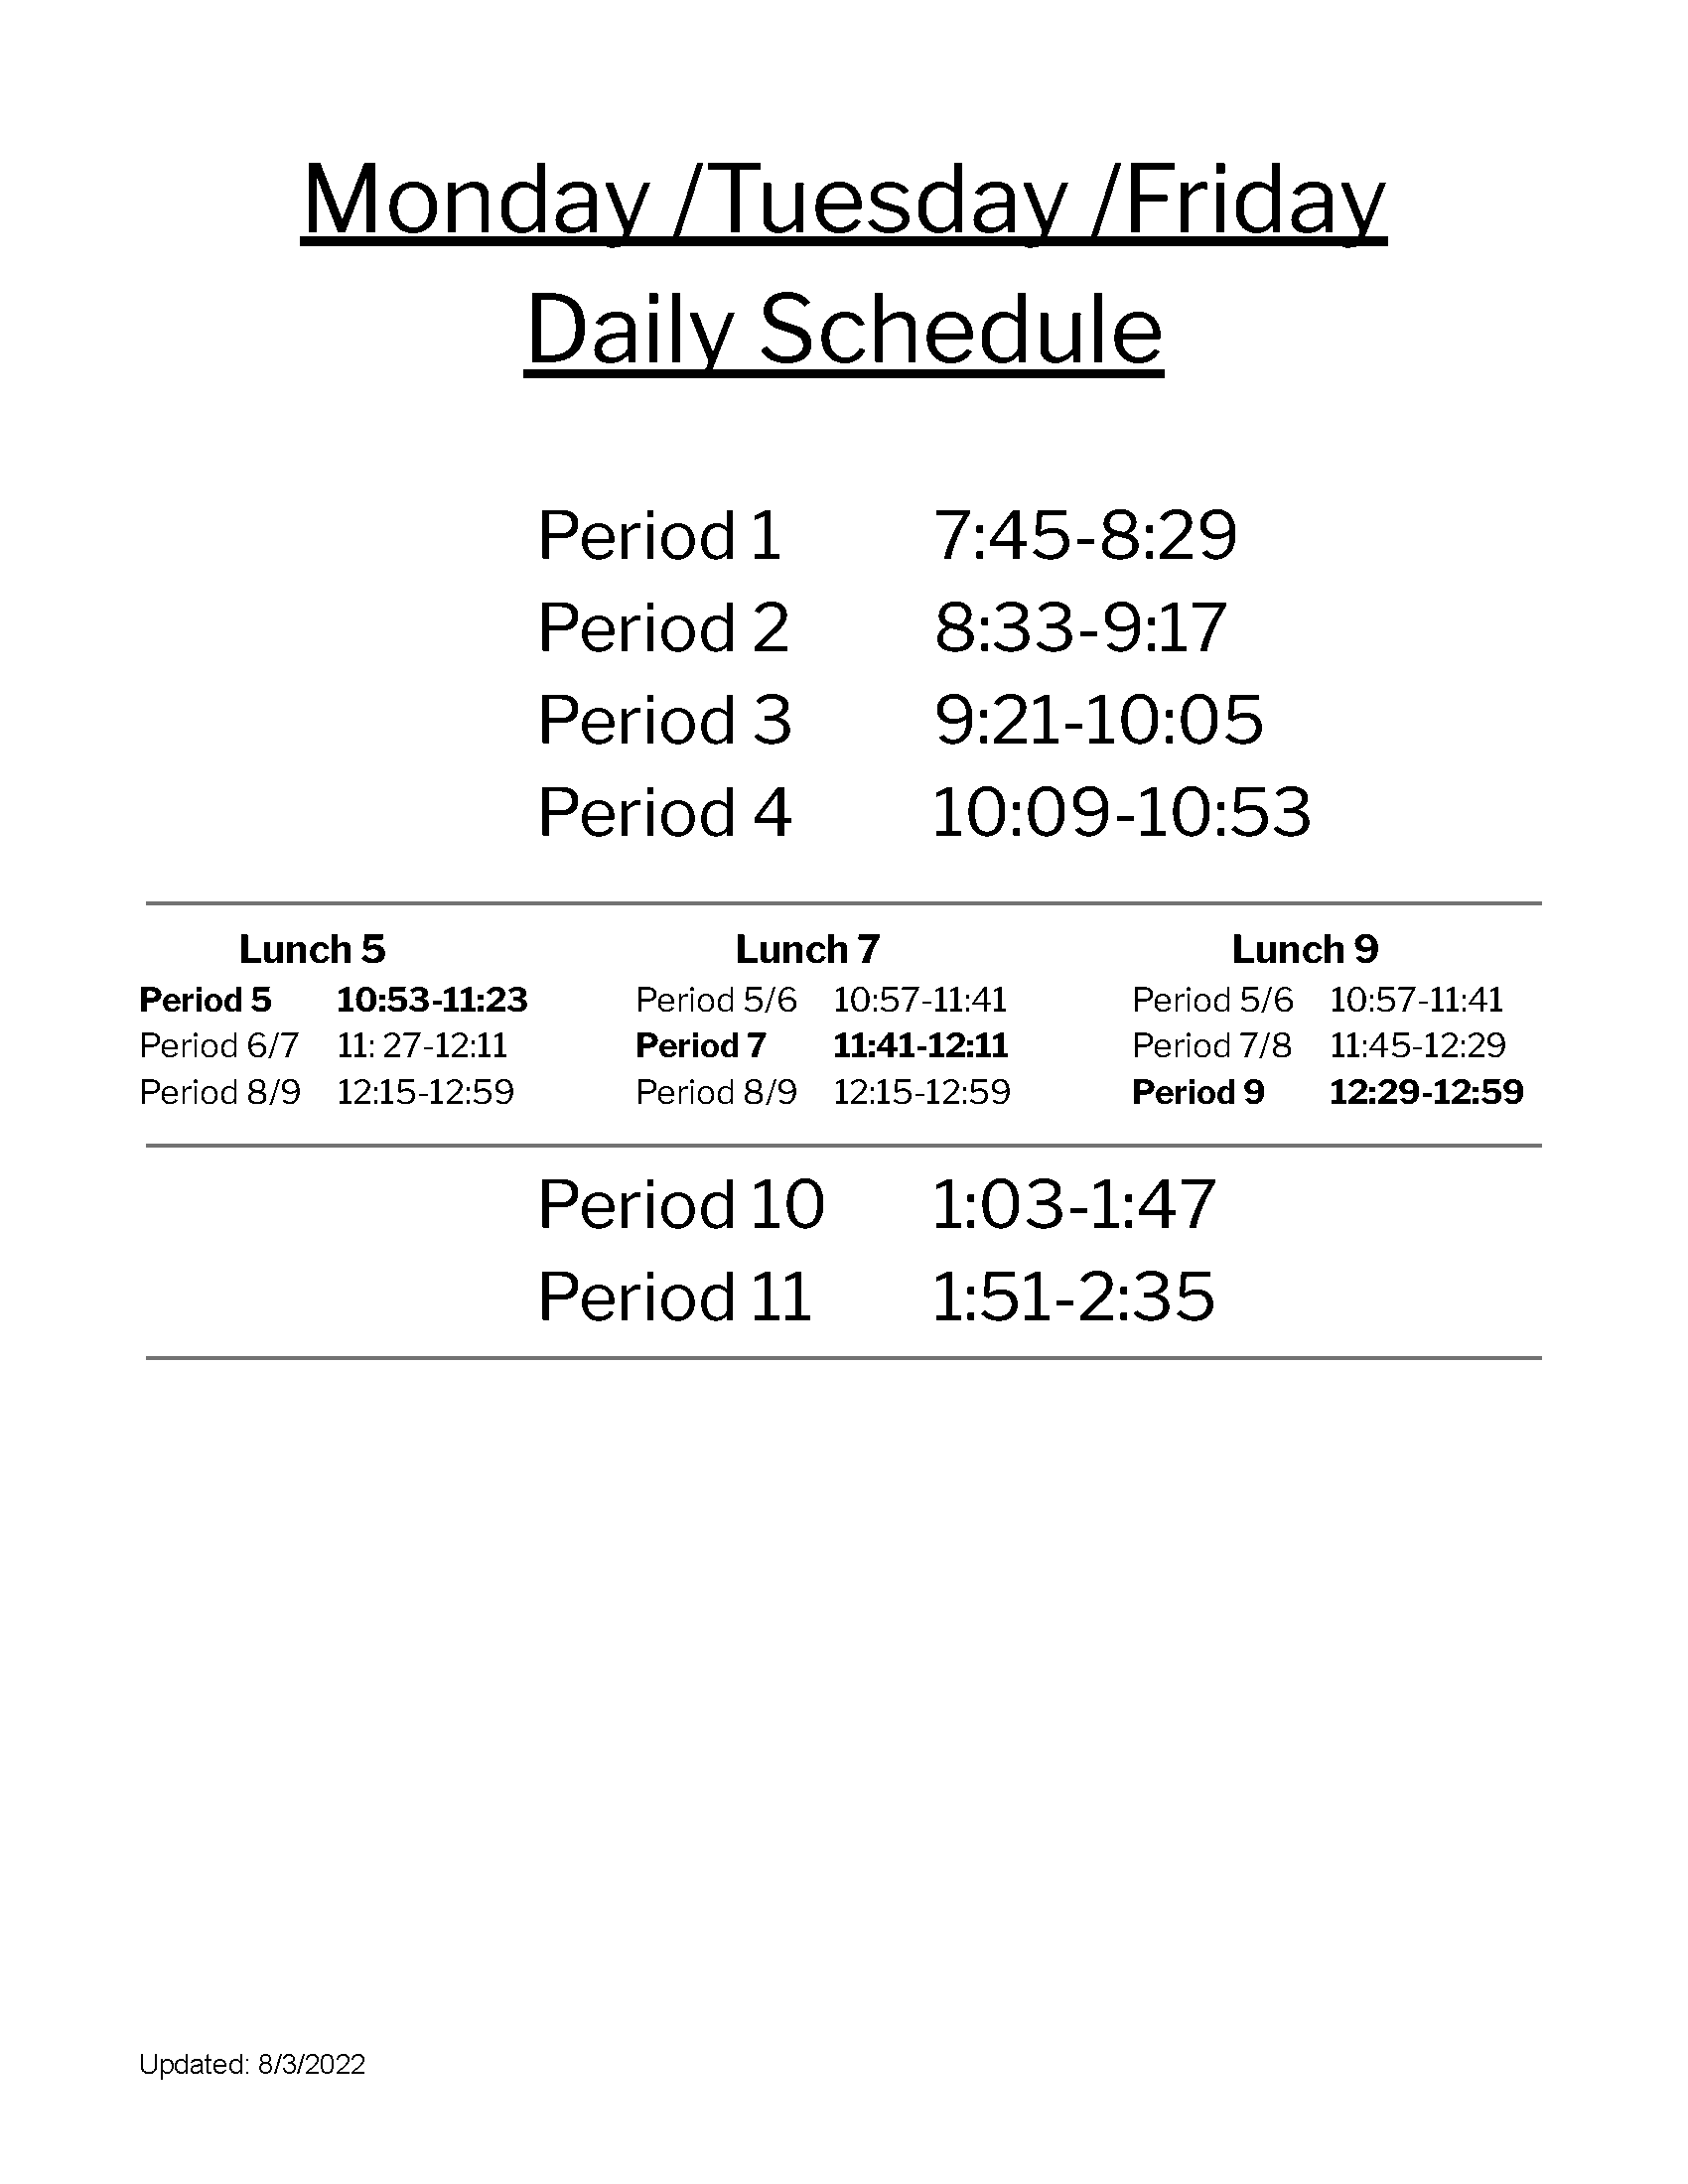 Monday/Tuesday/Friday Schedule